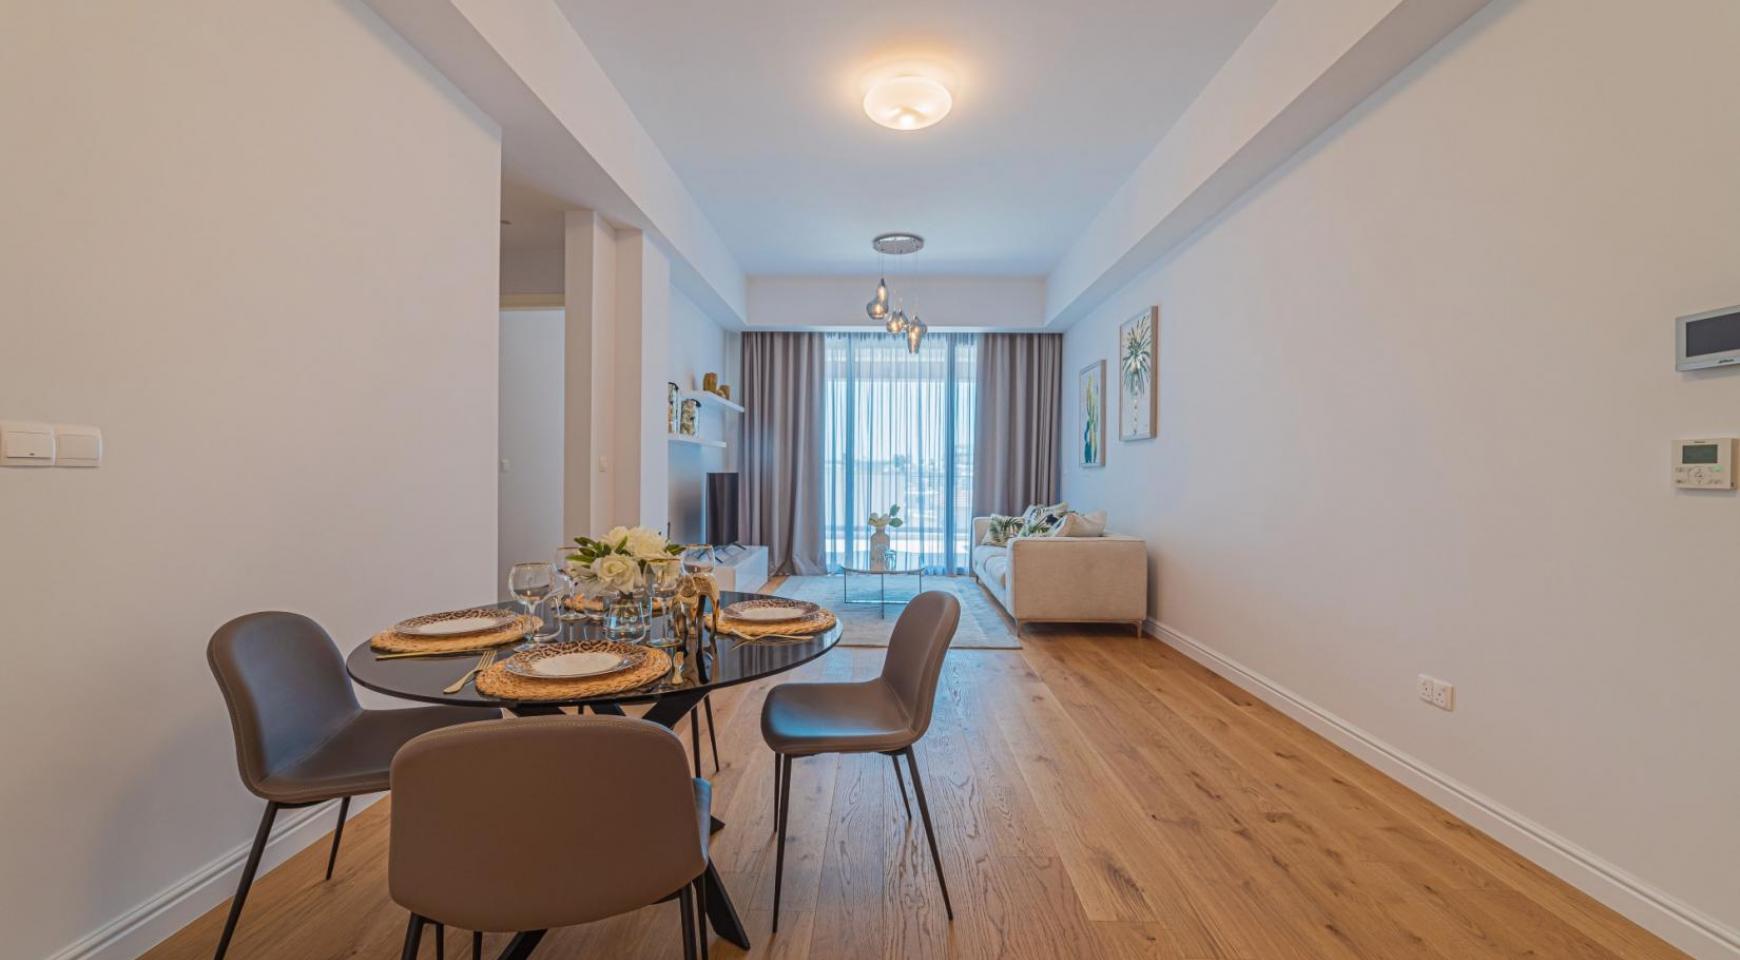 Hortensia Residence, Apt. 203. 3 Bedroom Apartment within a New Complex near the Sea - 18